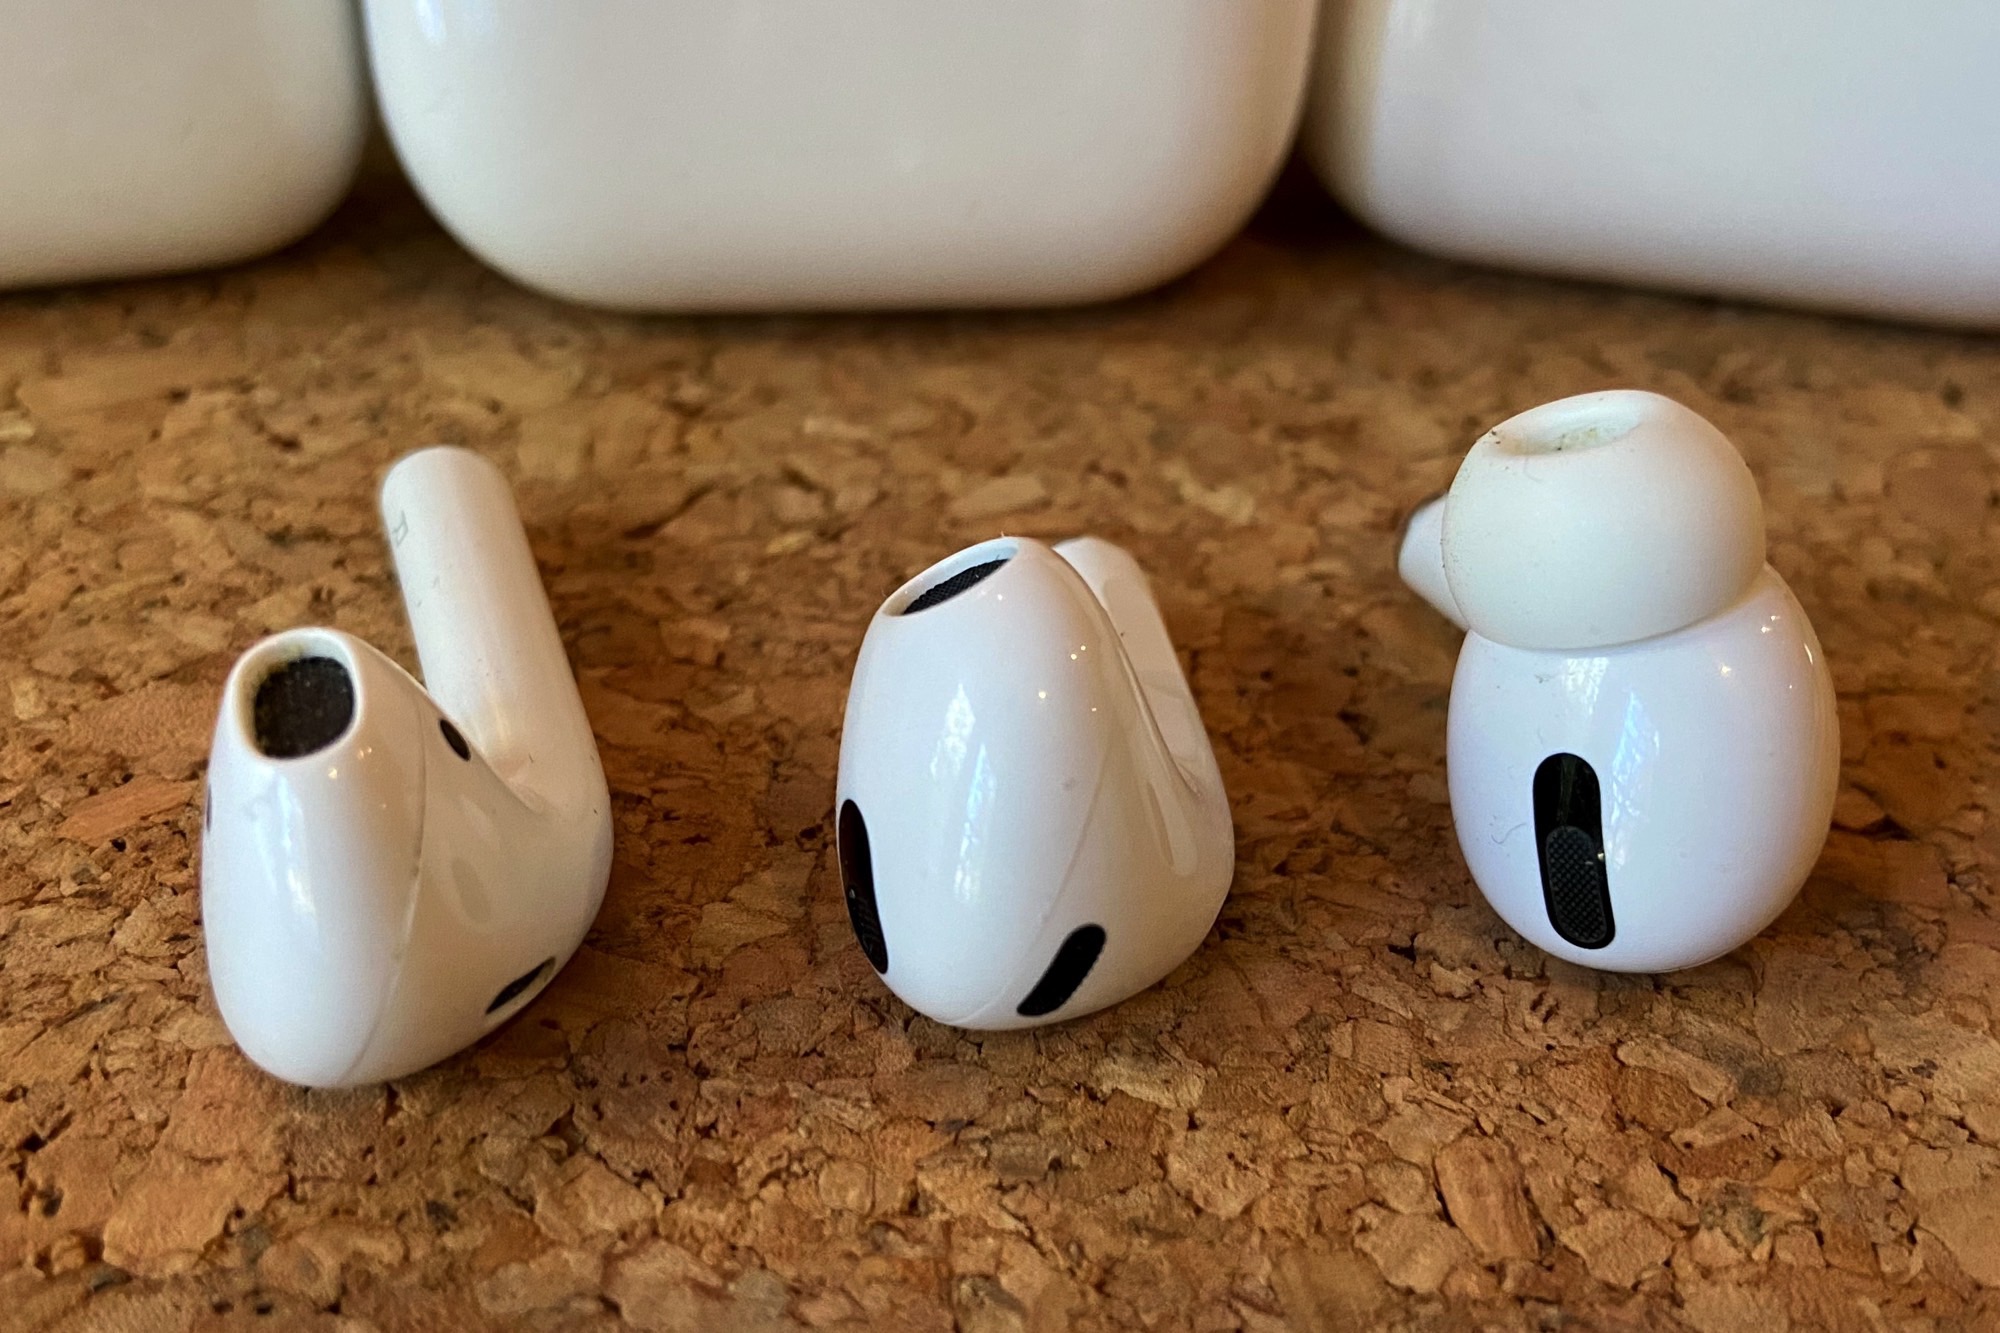 AirPods 3, AirPods, and AirPods Pro side by side.